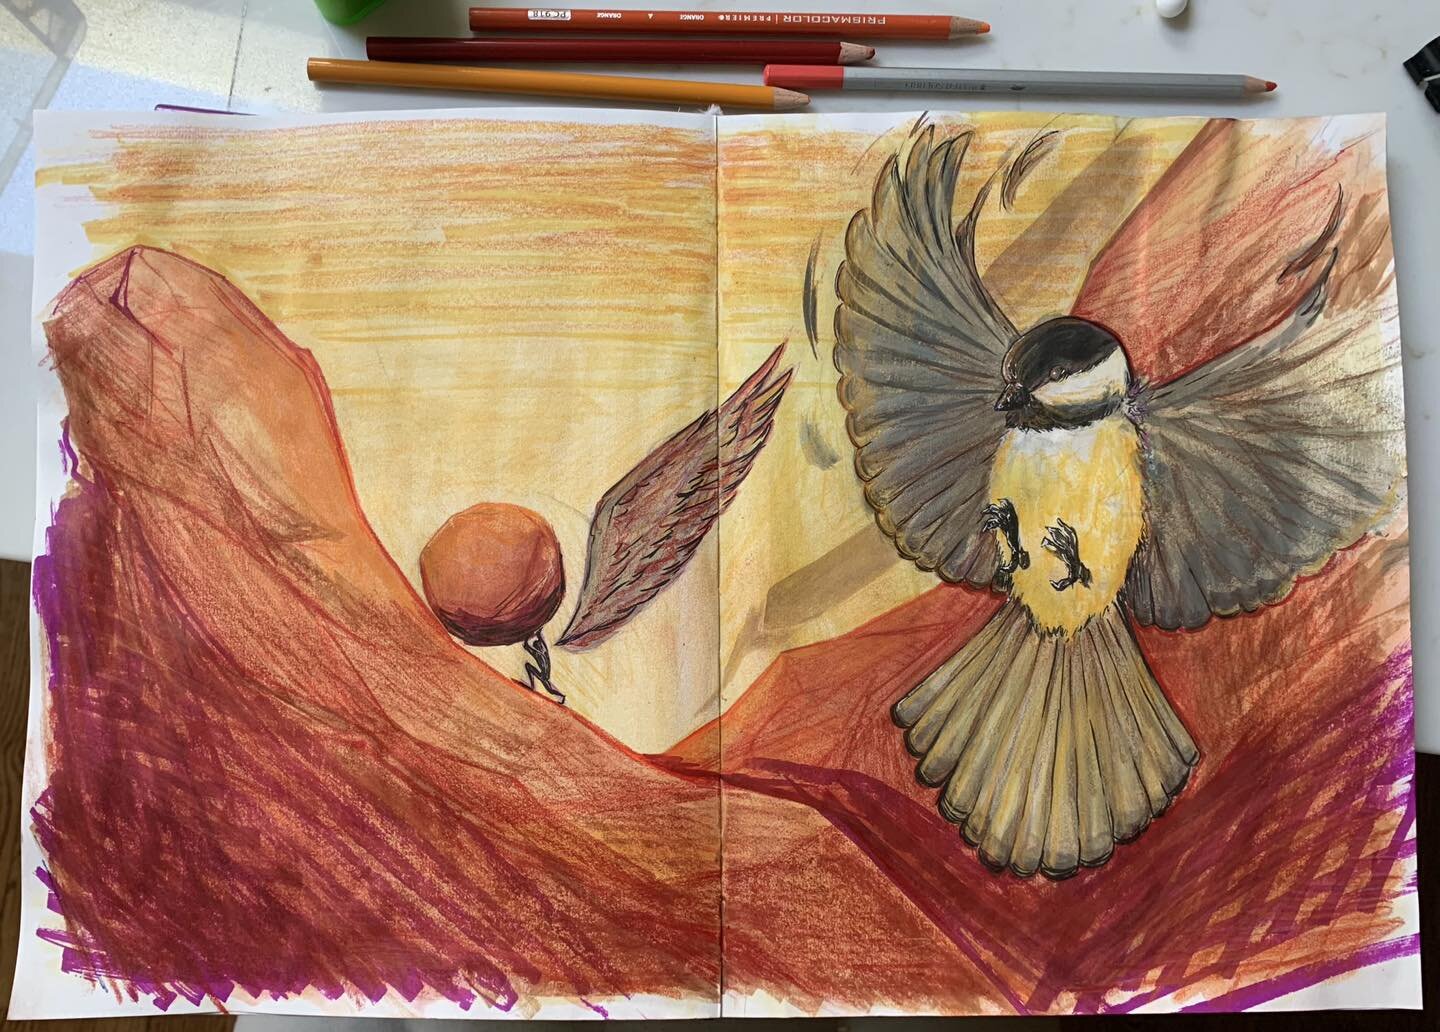 Sometimes when I want to fill up a sketchbook spread I ask for a random prompt or words to get me going. This one was Boulder and Chickadee. 
.
.
.
.
#traditional #sketch #sketching #sketchbook #alcoholmarkers #alcoholmarkerart #alcoholmarkersart #ch